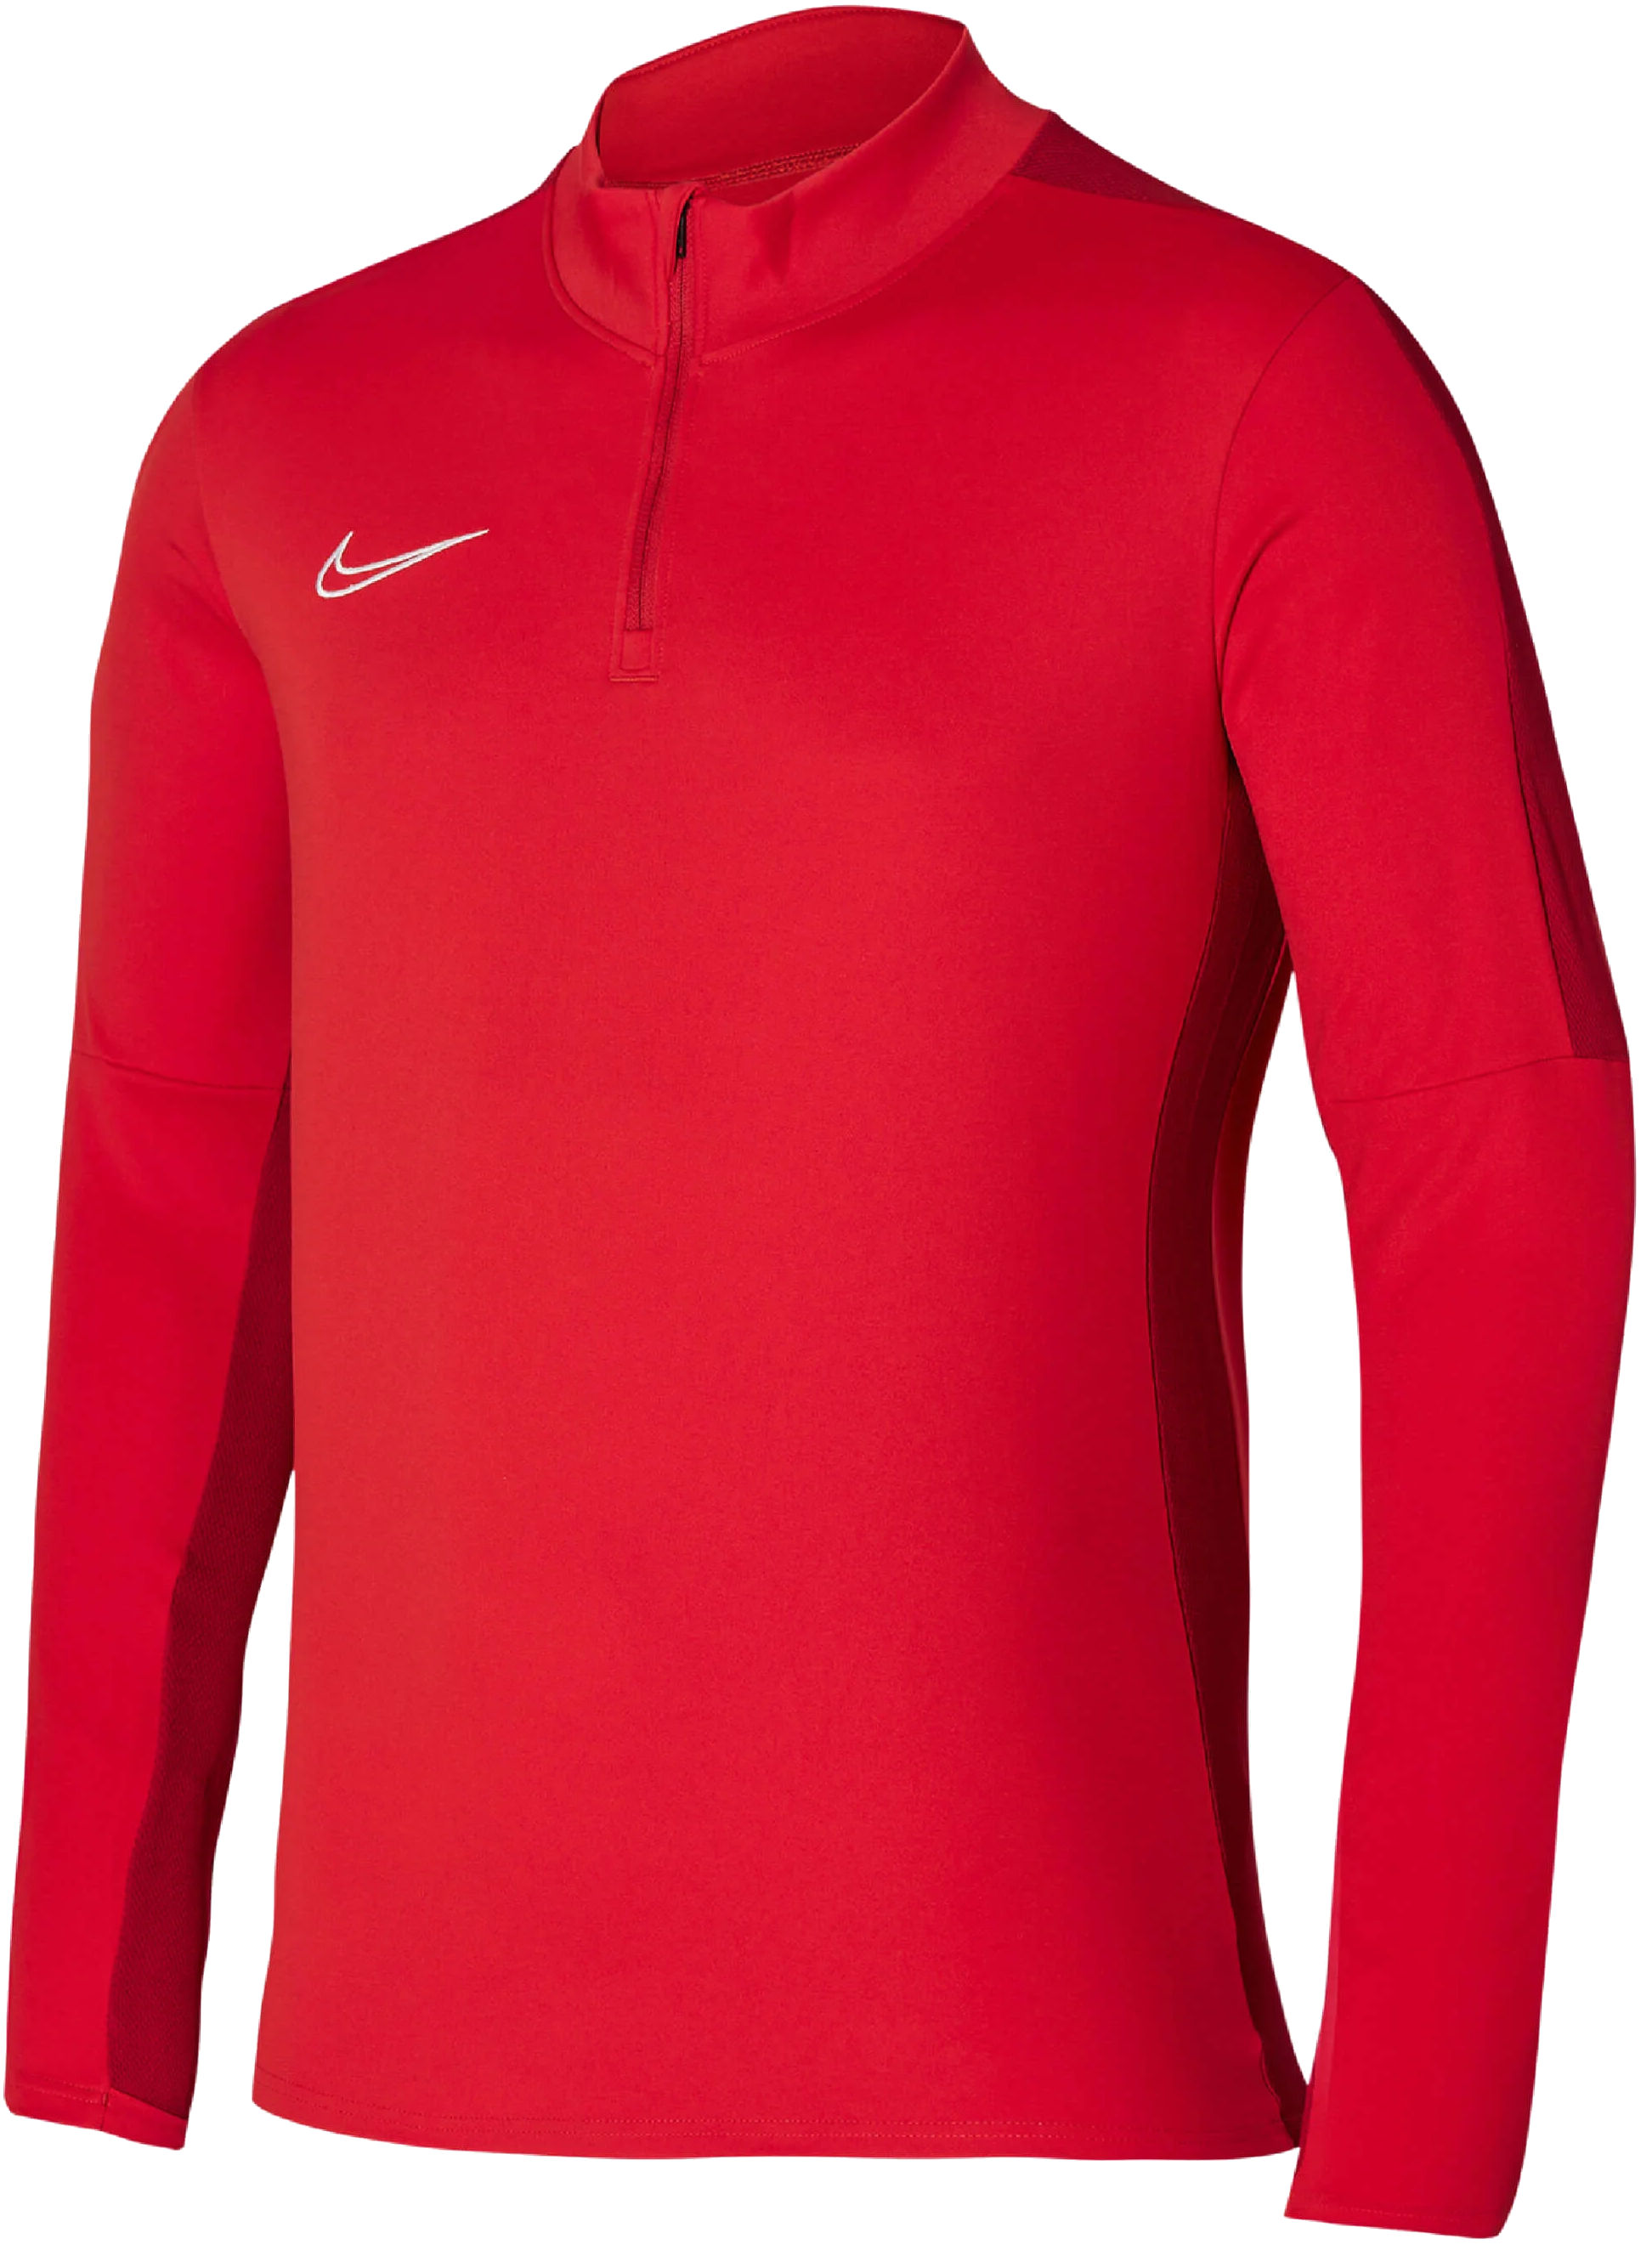 nike dri fit academy men s soccer drill top stock 551056 dr1352 657